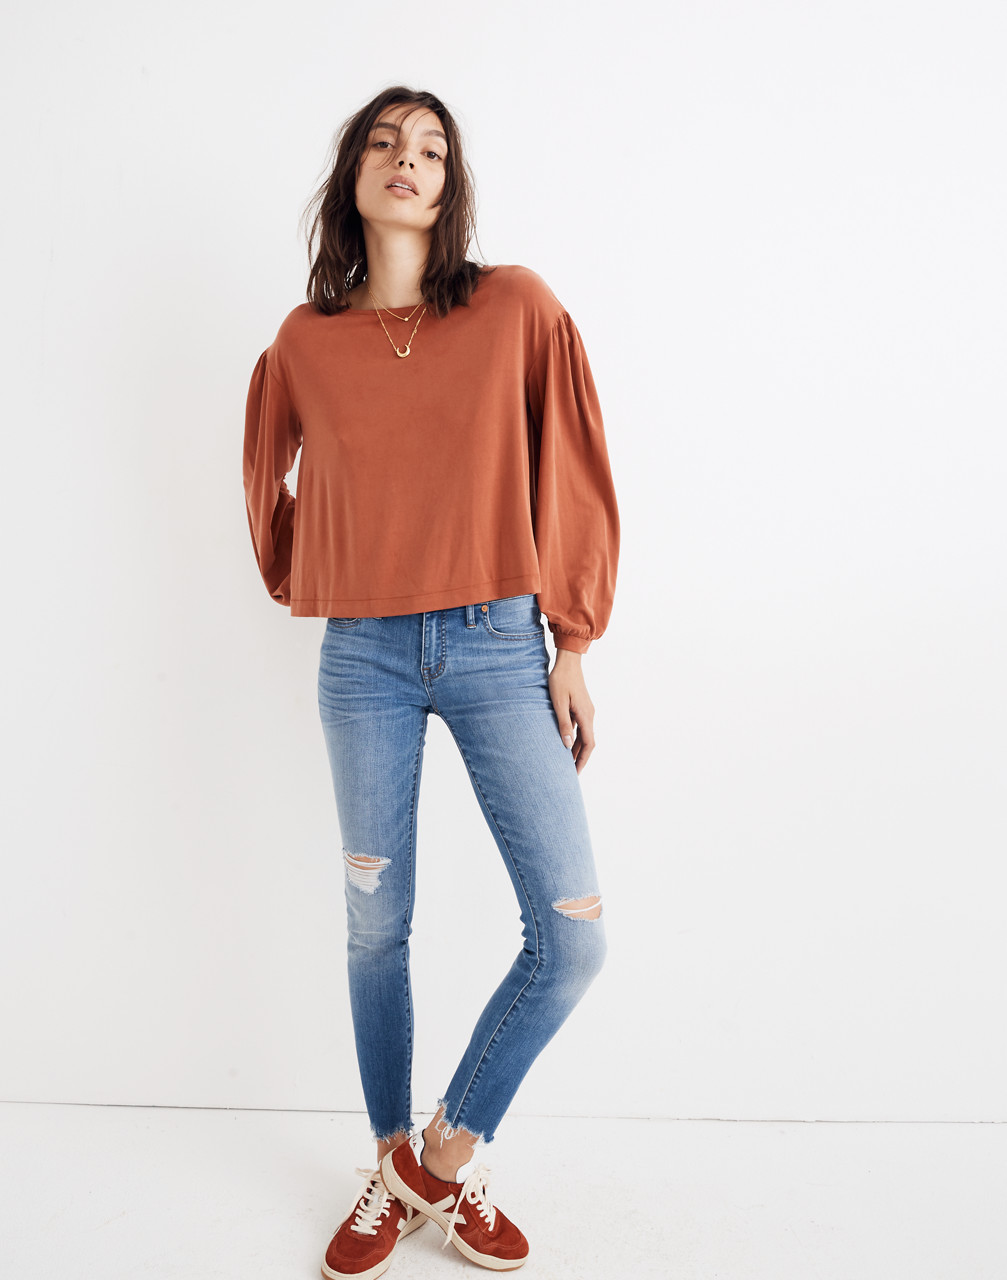 Sandwashed Gathered-Sleeve Top in rusty torch image 2